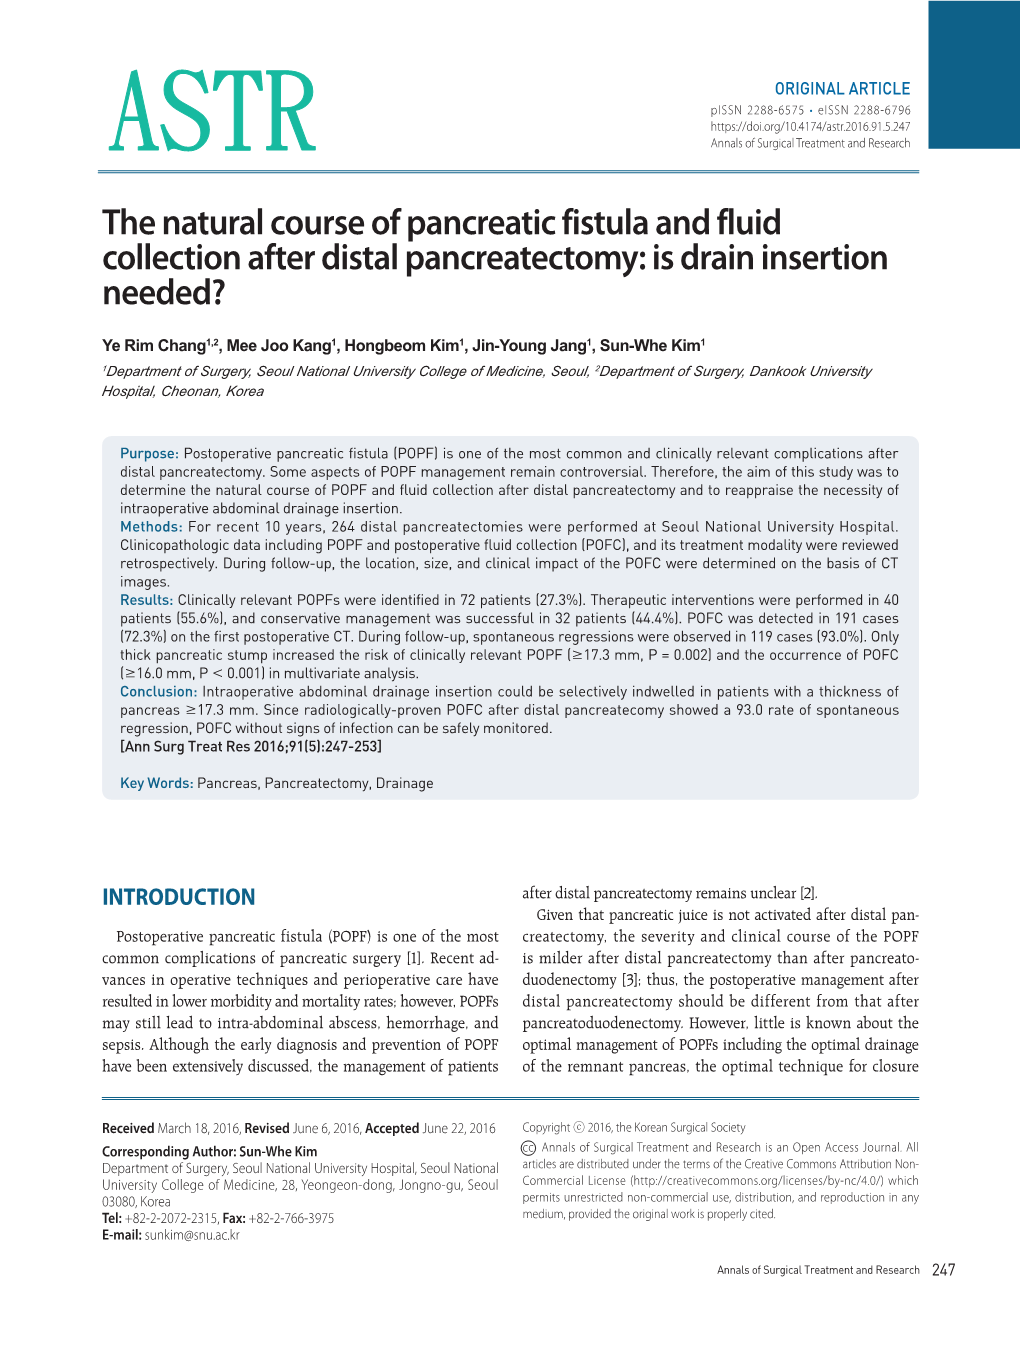 The Natural Course of Pancreatic Fistula and Fluid Collection After Distal Pancreatectomy: Is Drain Insertion Needed?